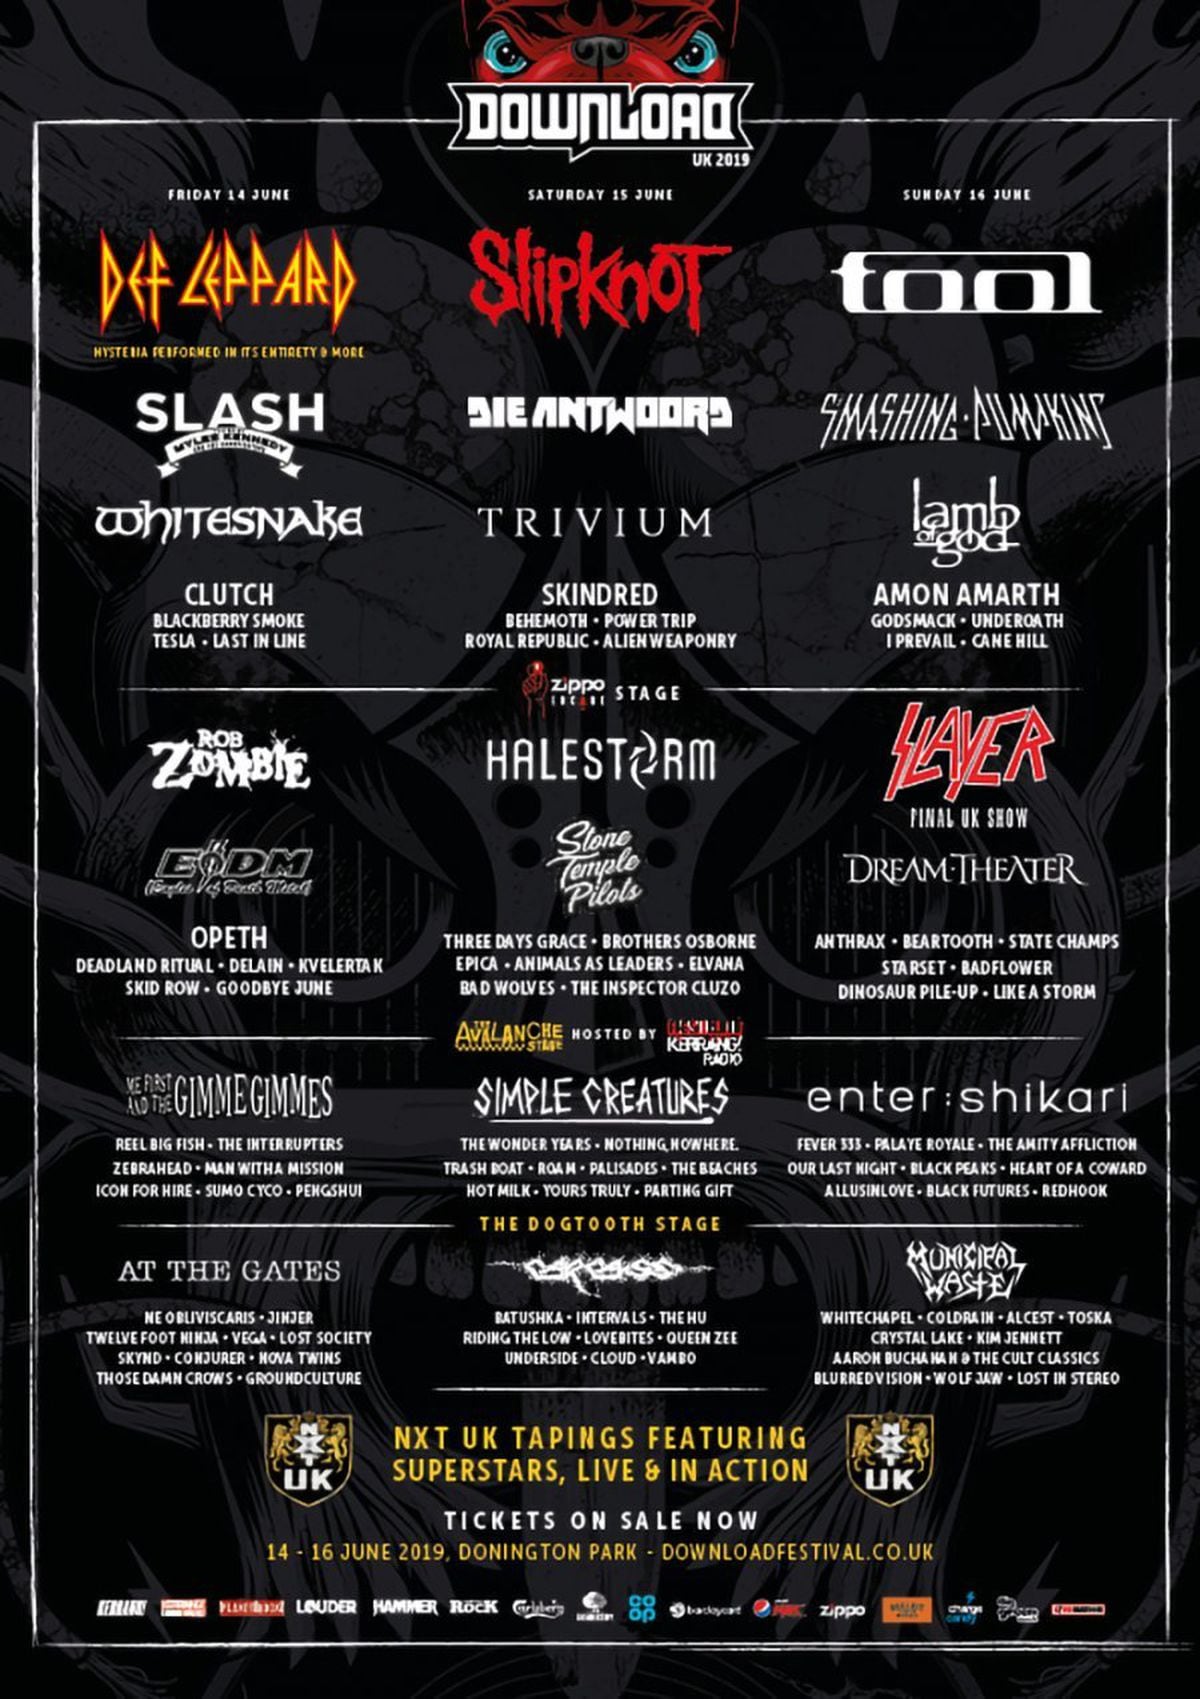 Def Leppard, Slipknot, Tool and more Top acts to see at Download